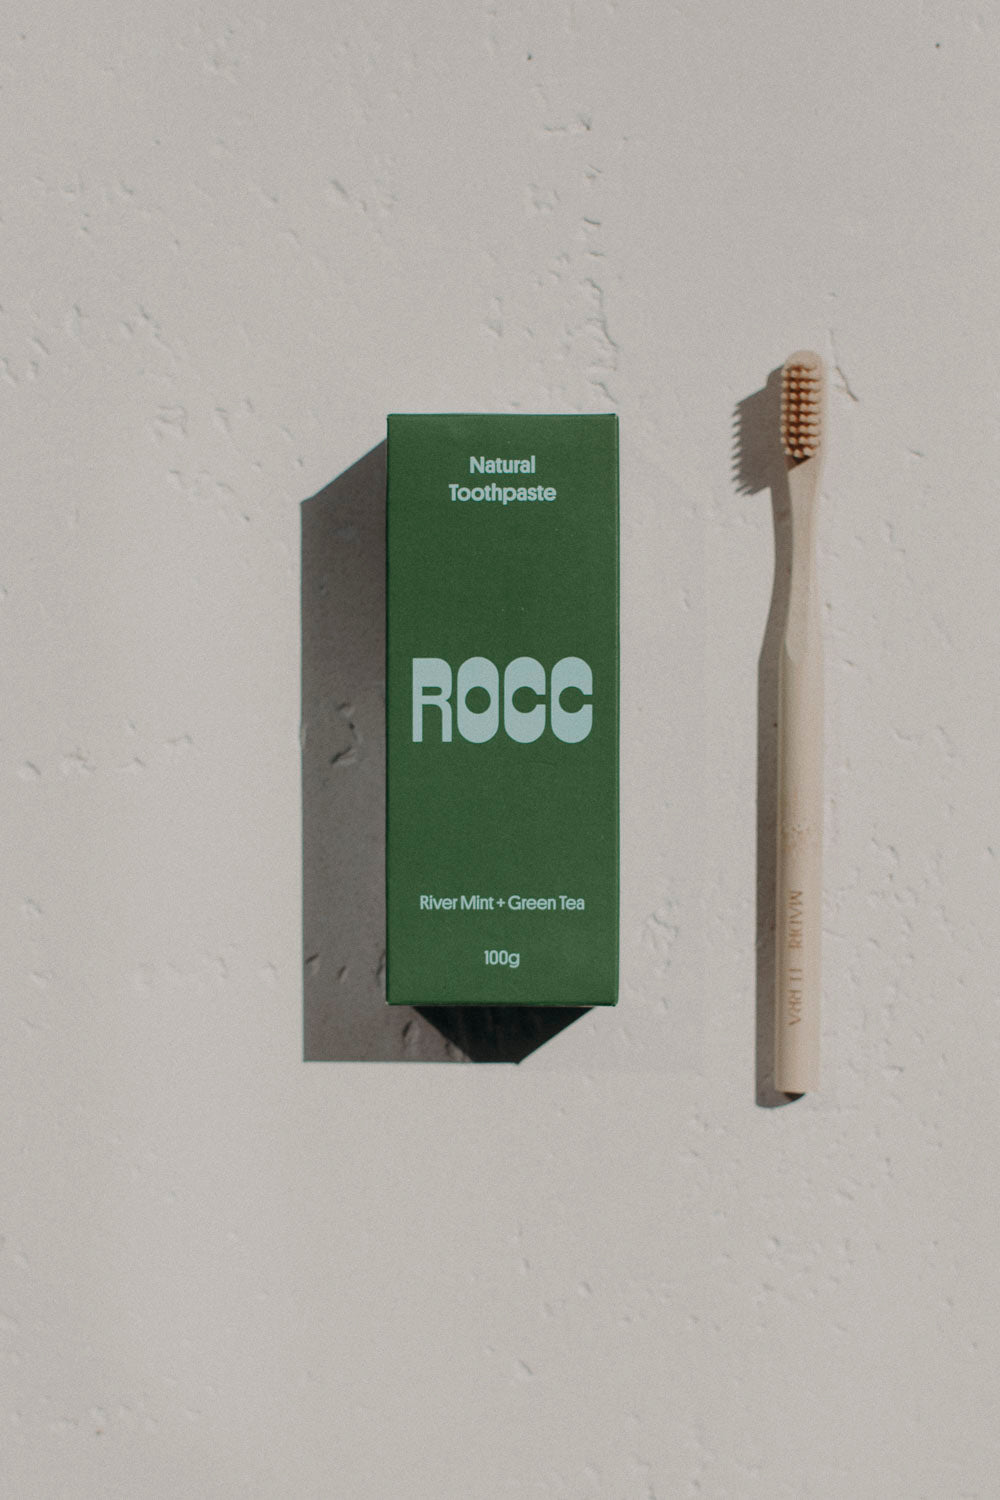 Madre Terra Toothbrush (Beige) and ROCC Toothpaste Set (River Mint + Green Tea)